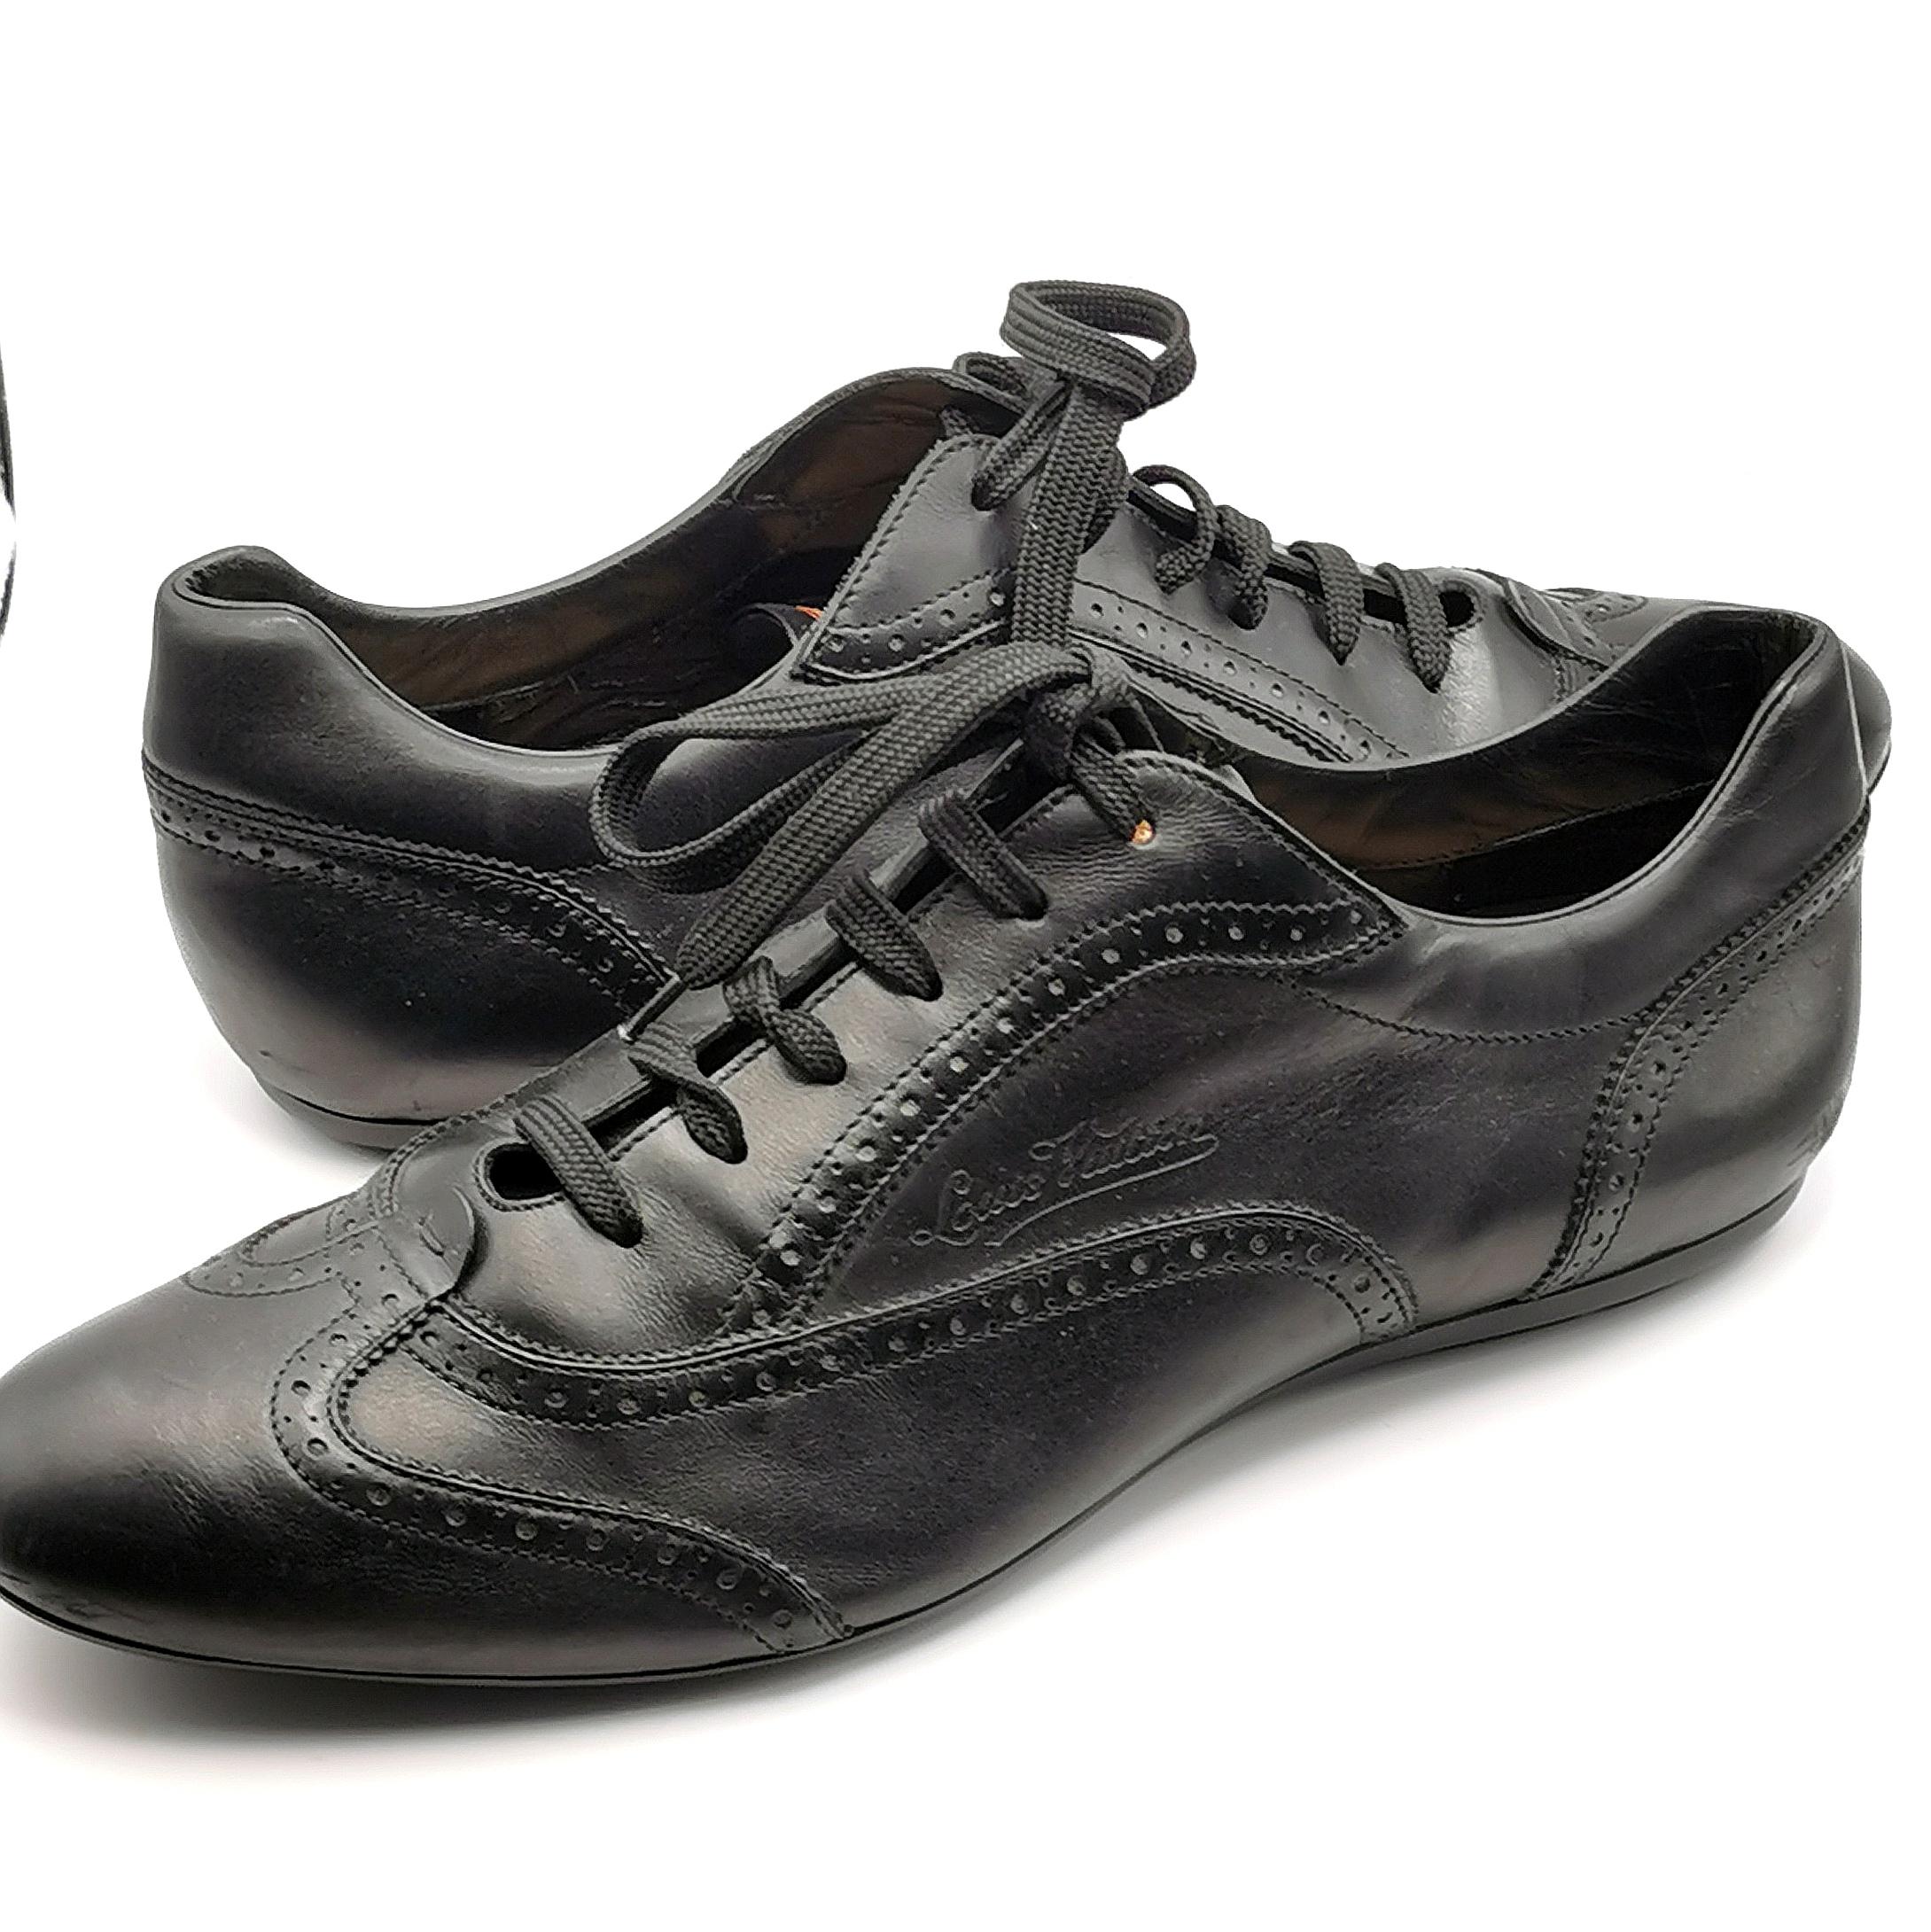 A super stylish pair of Louis Vuitton black leather lace up brogue style sneakers. 

These are the perfect blend of comfort and style with a smart black leather brogue style with Louis Vuitton embossed logo and punch out detailing. 

The tongue